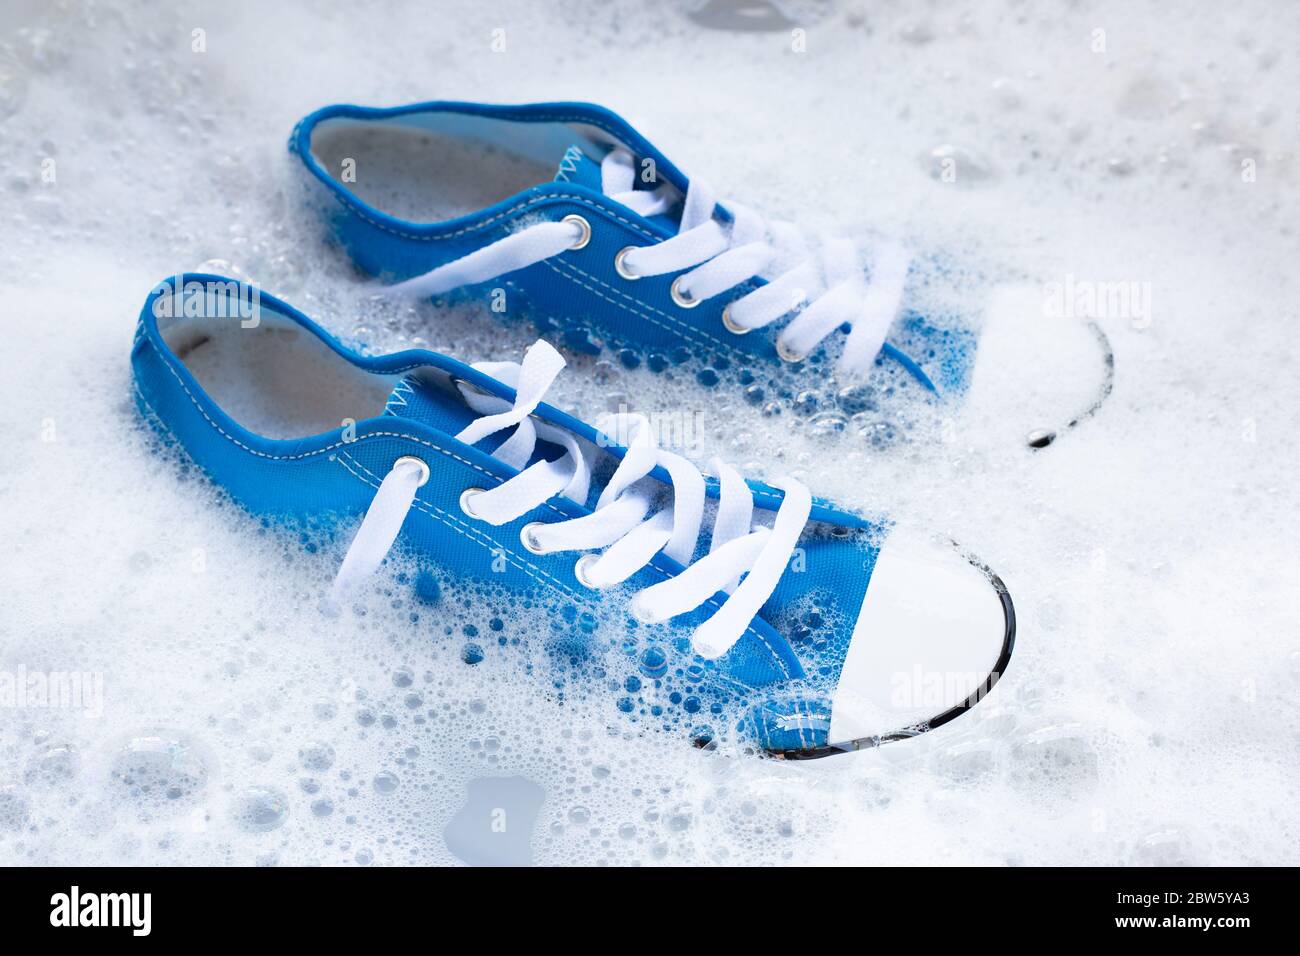 Soak shoes before washing. Cleaning Dirty sneakers Stock Photo - Alamy